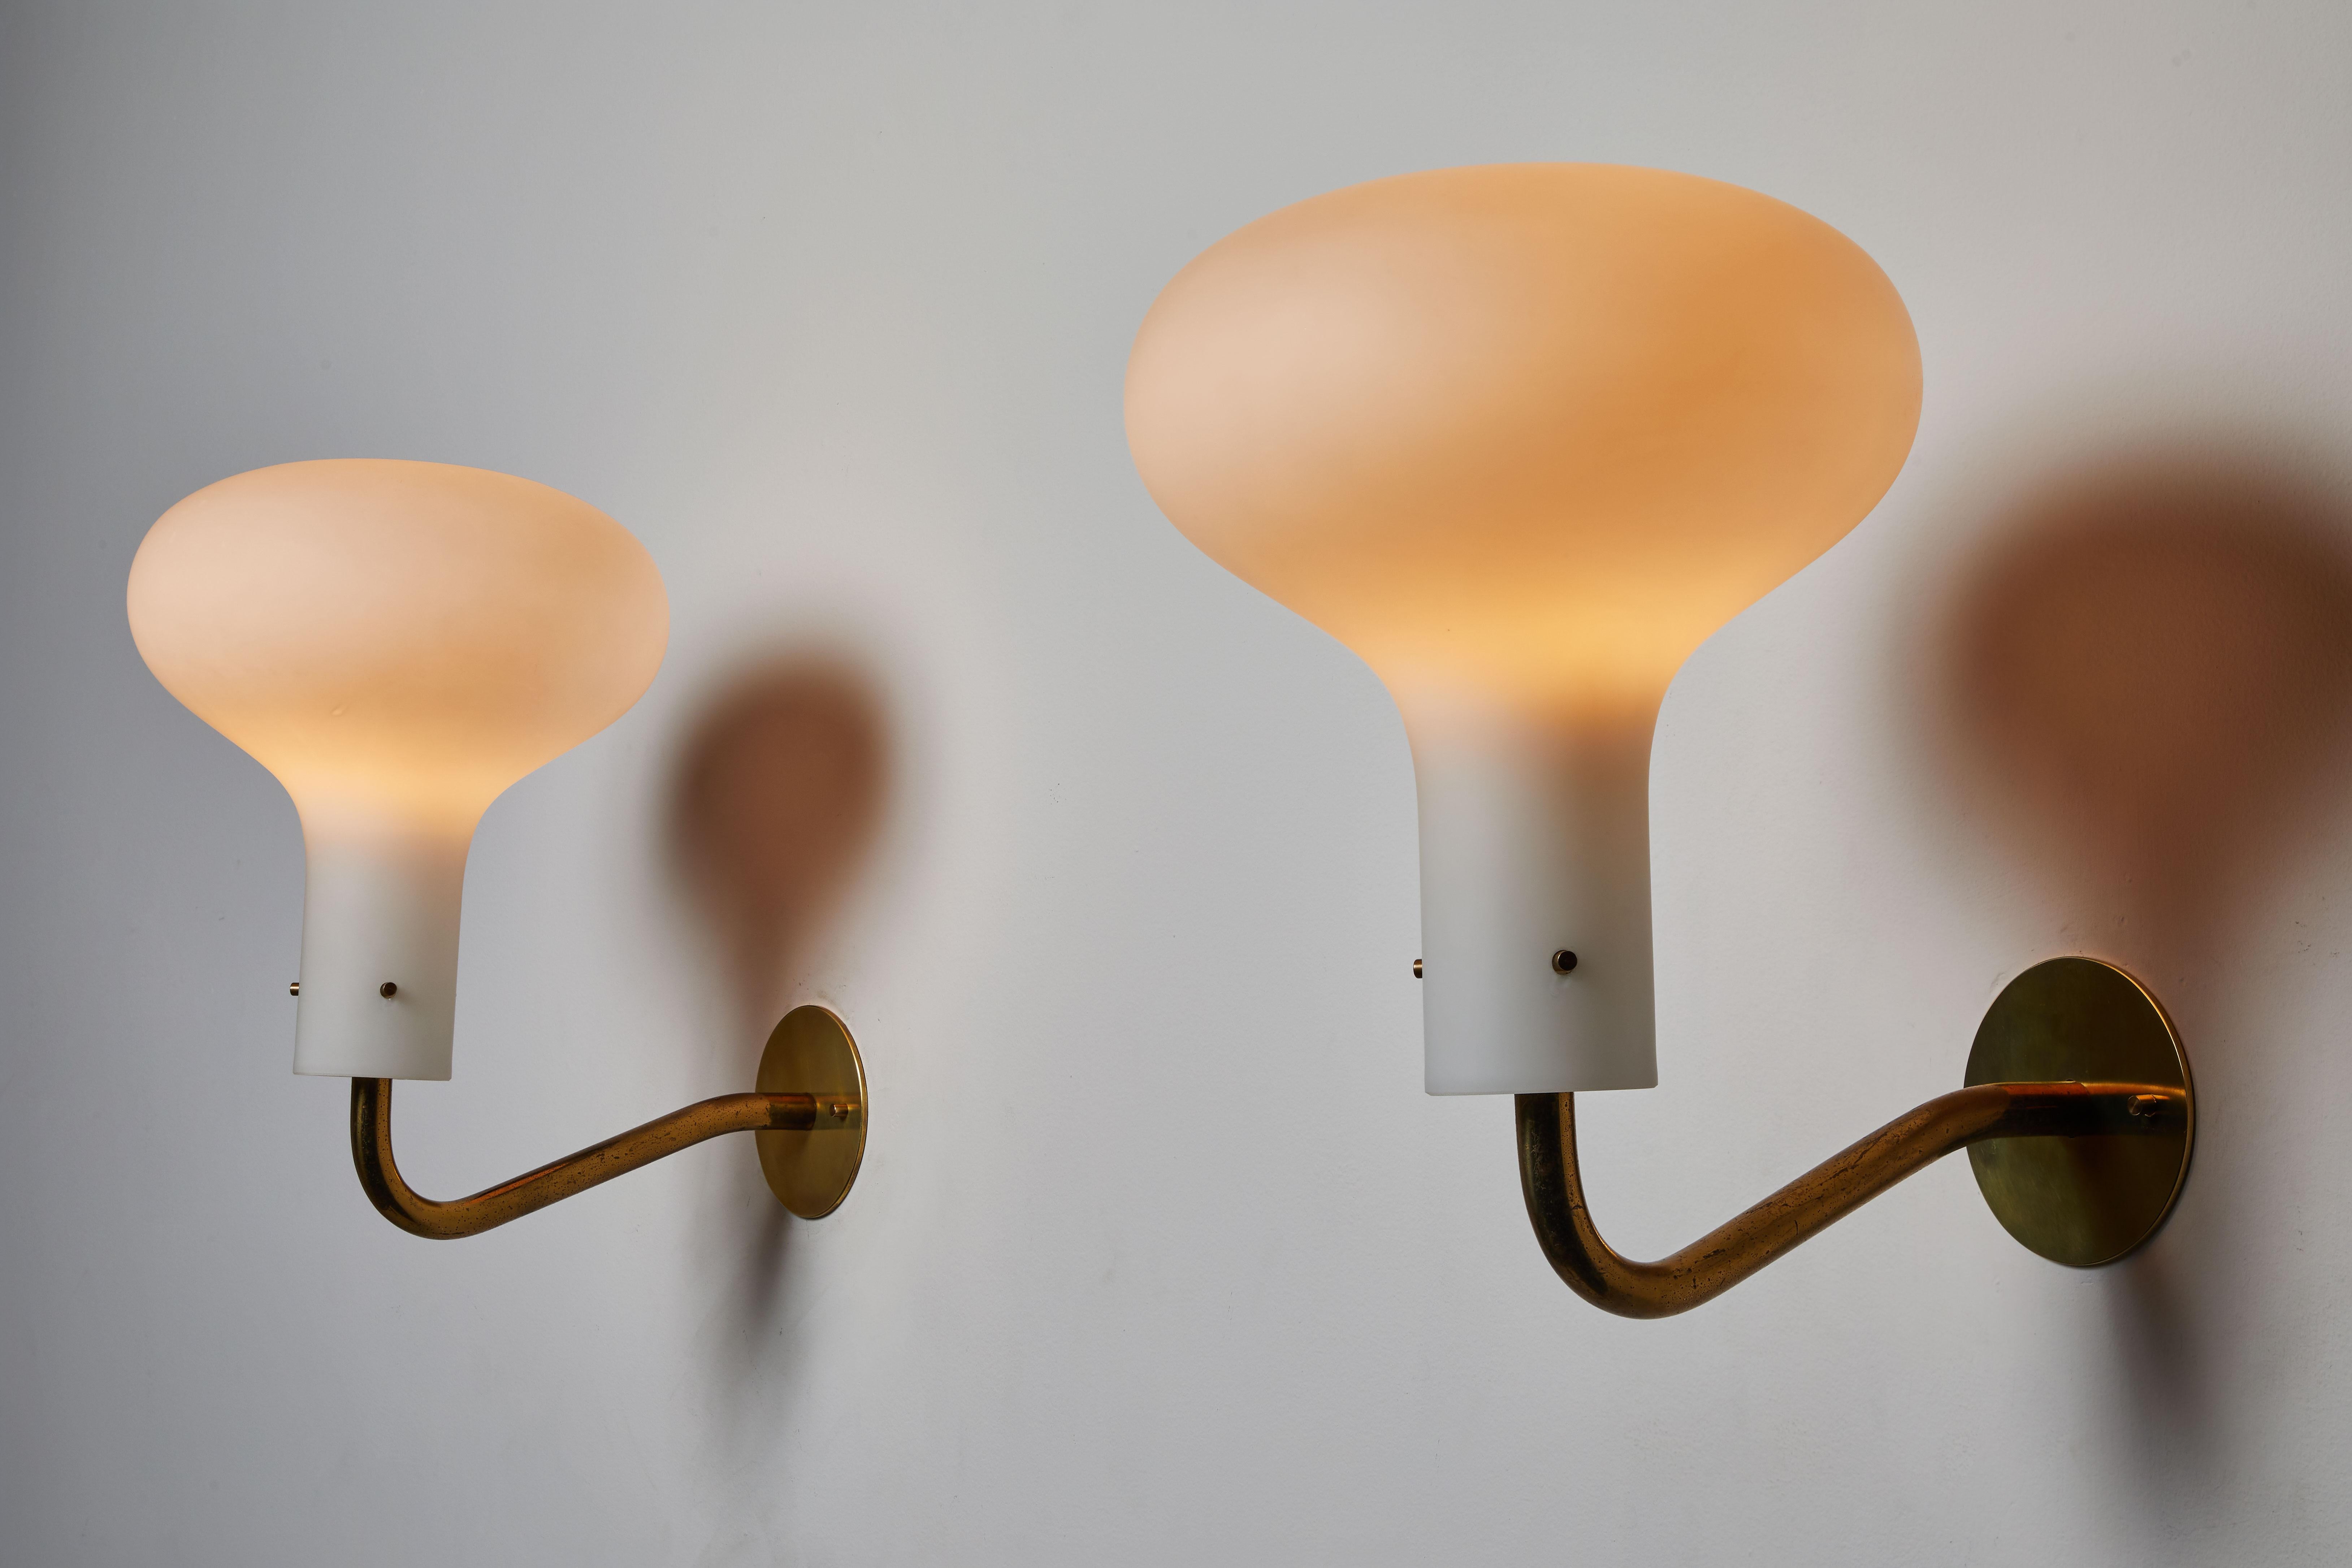 Two model Lp12 Galleria sconces by Ignazio Gardella for Azucena. Designed and manufactured in Italy, 1958. Brass and brushed satin glass diffuser. Rewired for US junction boxes. Each light takes one E27 100w maximum bulb. Priced and sold